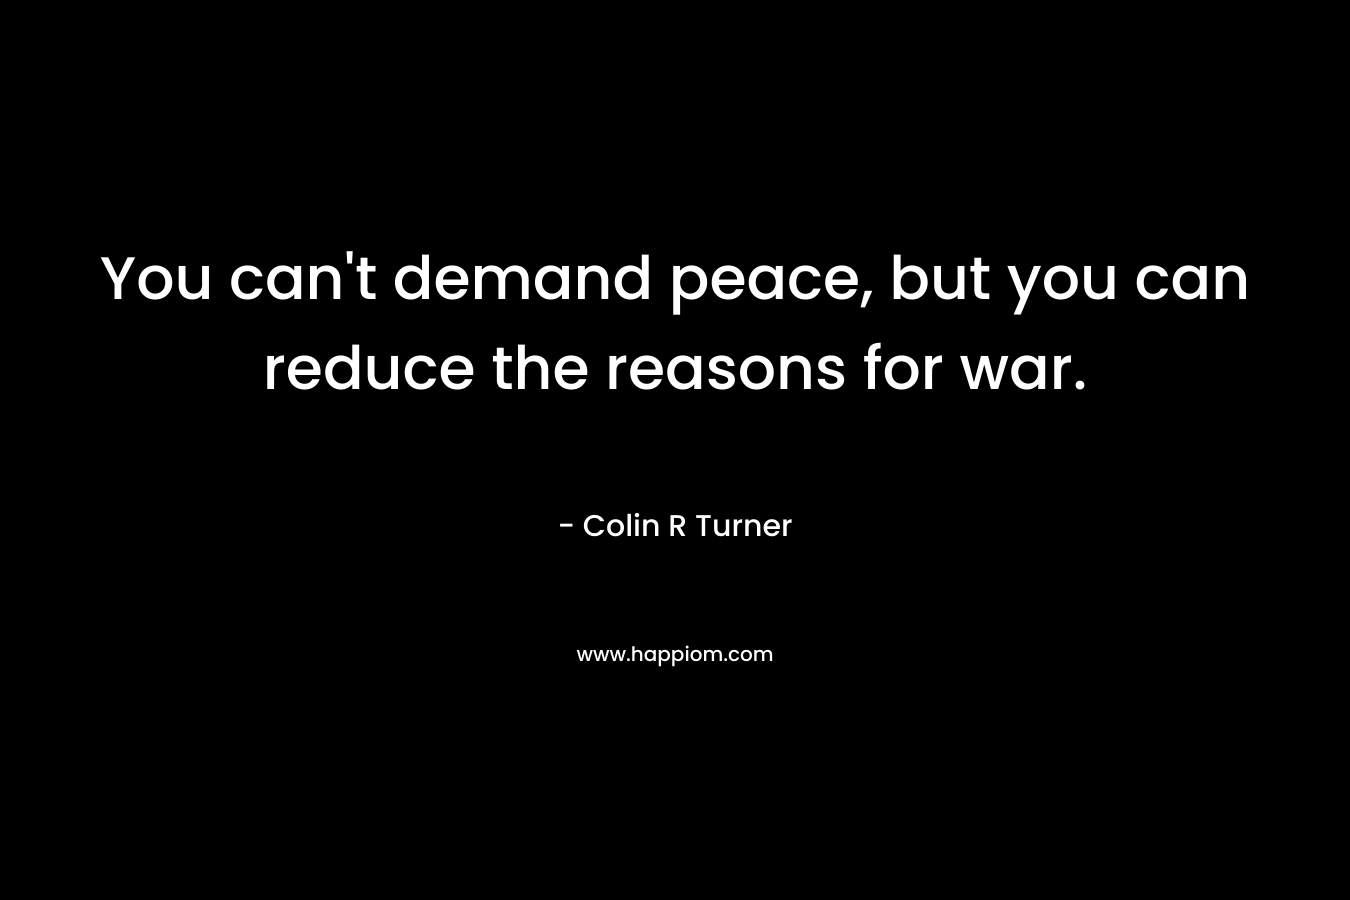 You can't demand peace, but you can reduce the reasons for war.